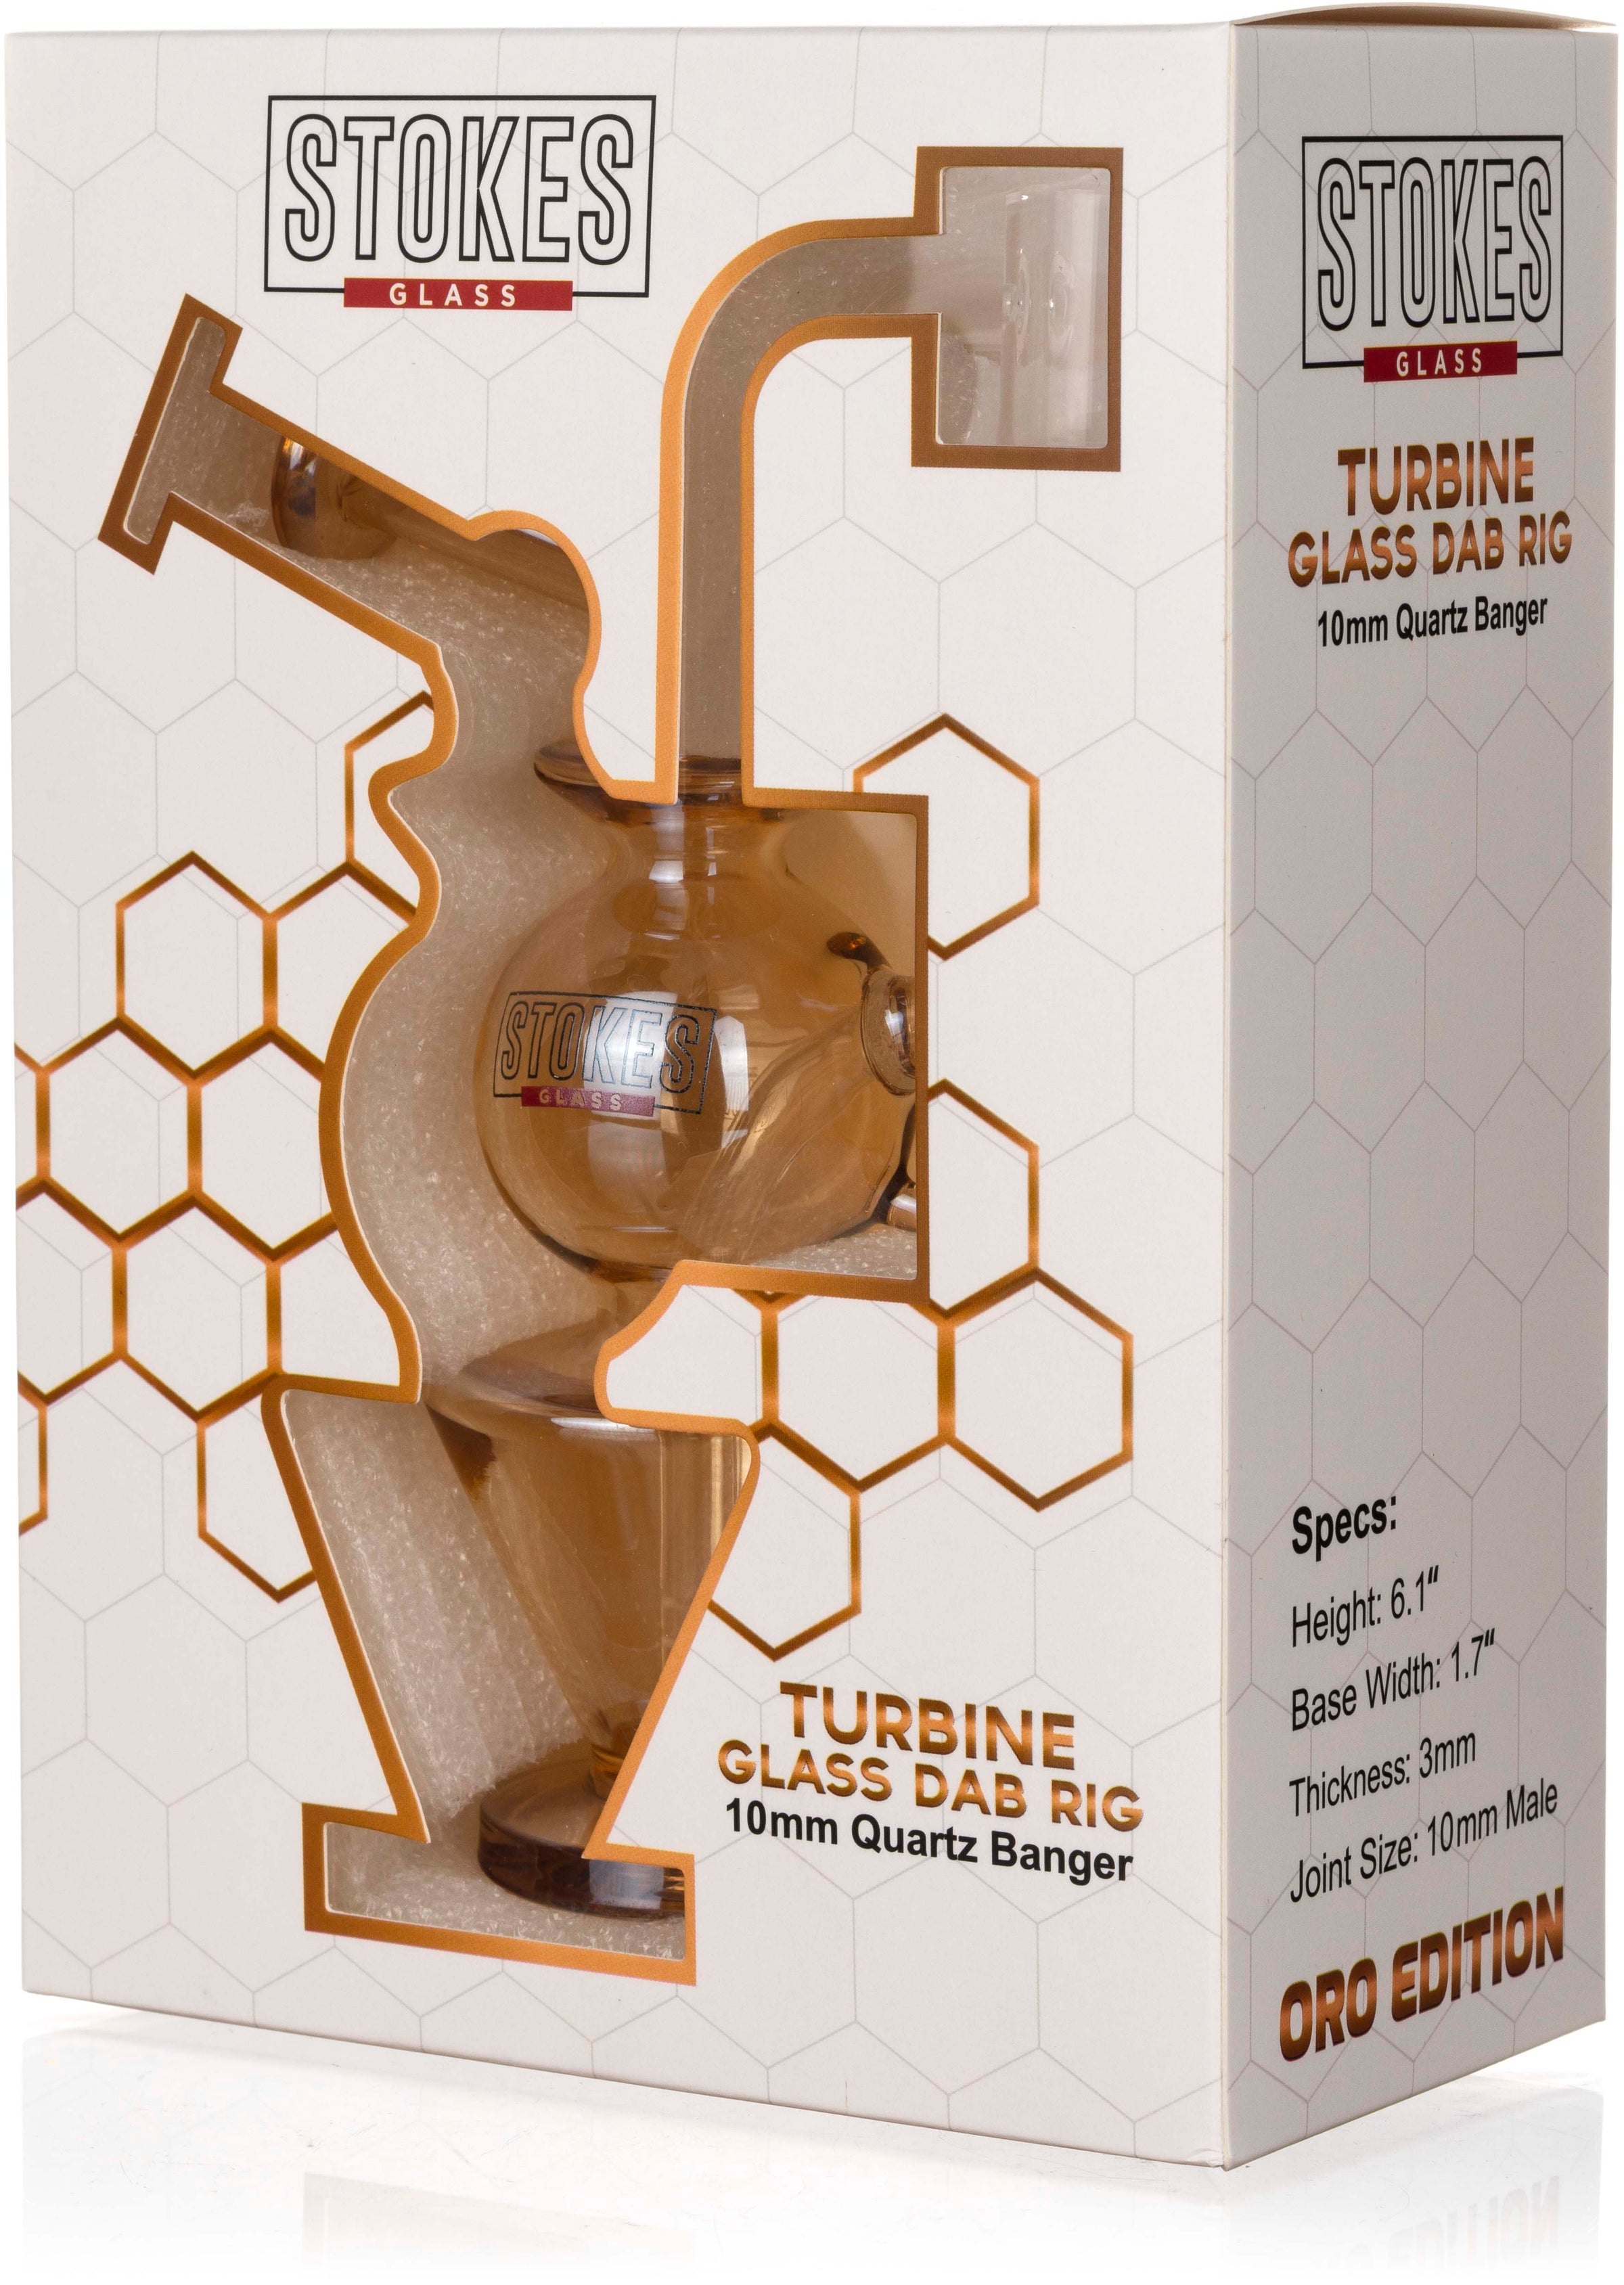 6" Turbine Dab Rig, by Stokes Glass (free banger included)